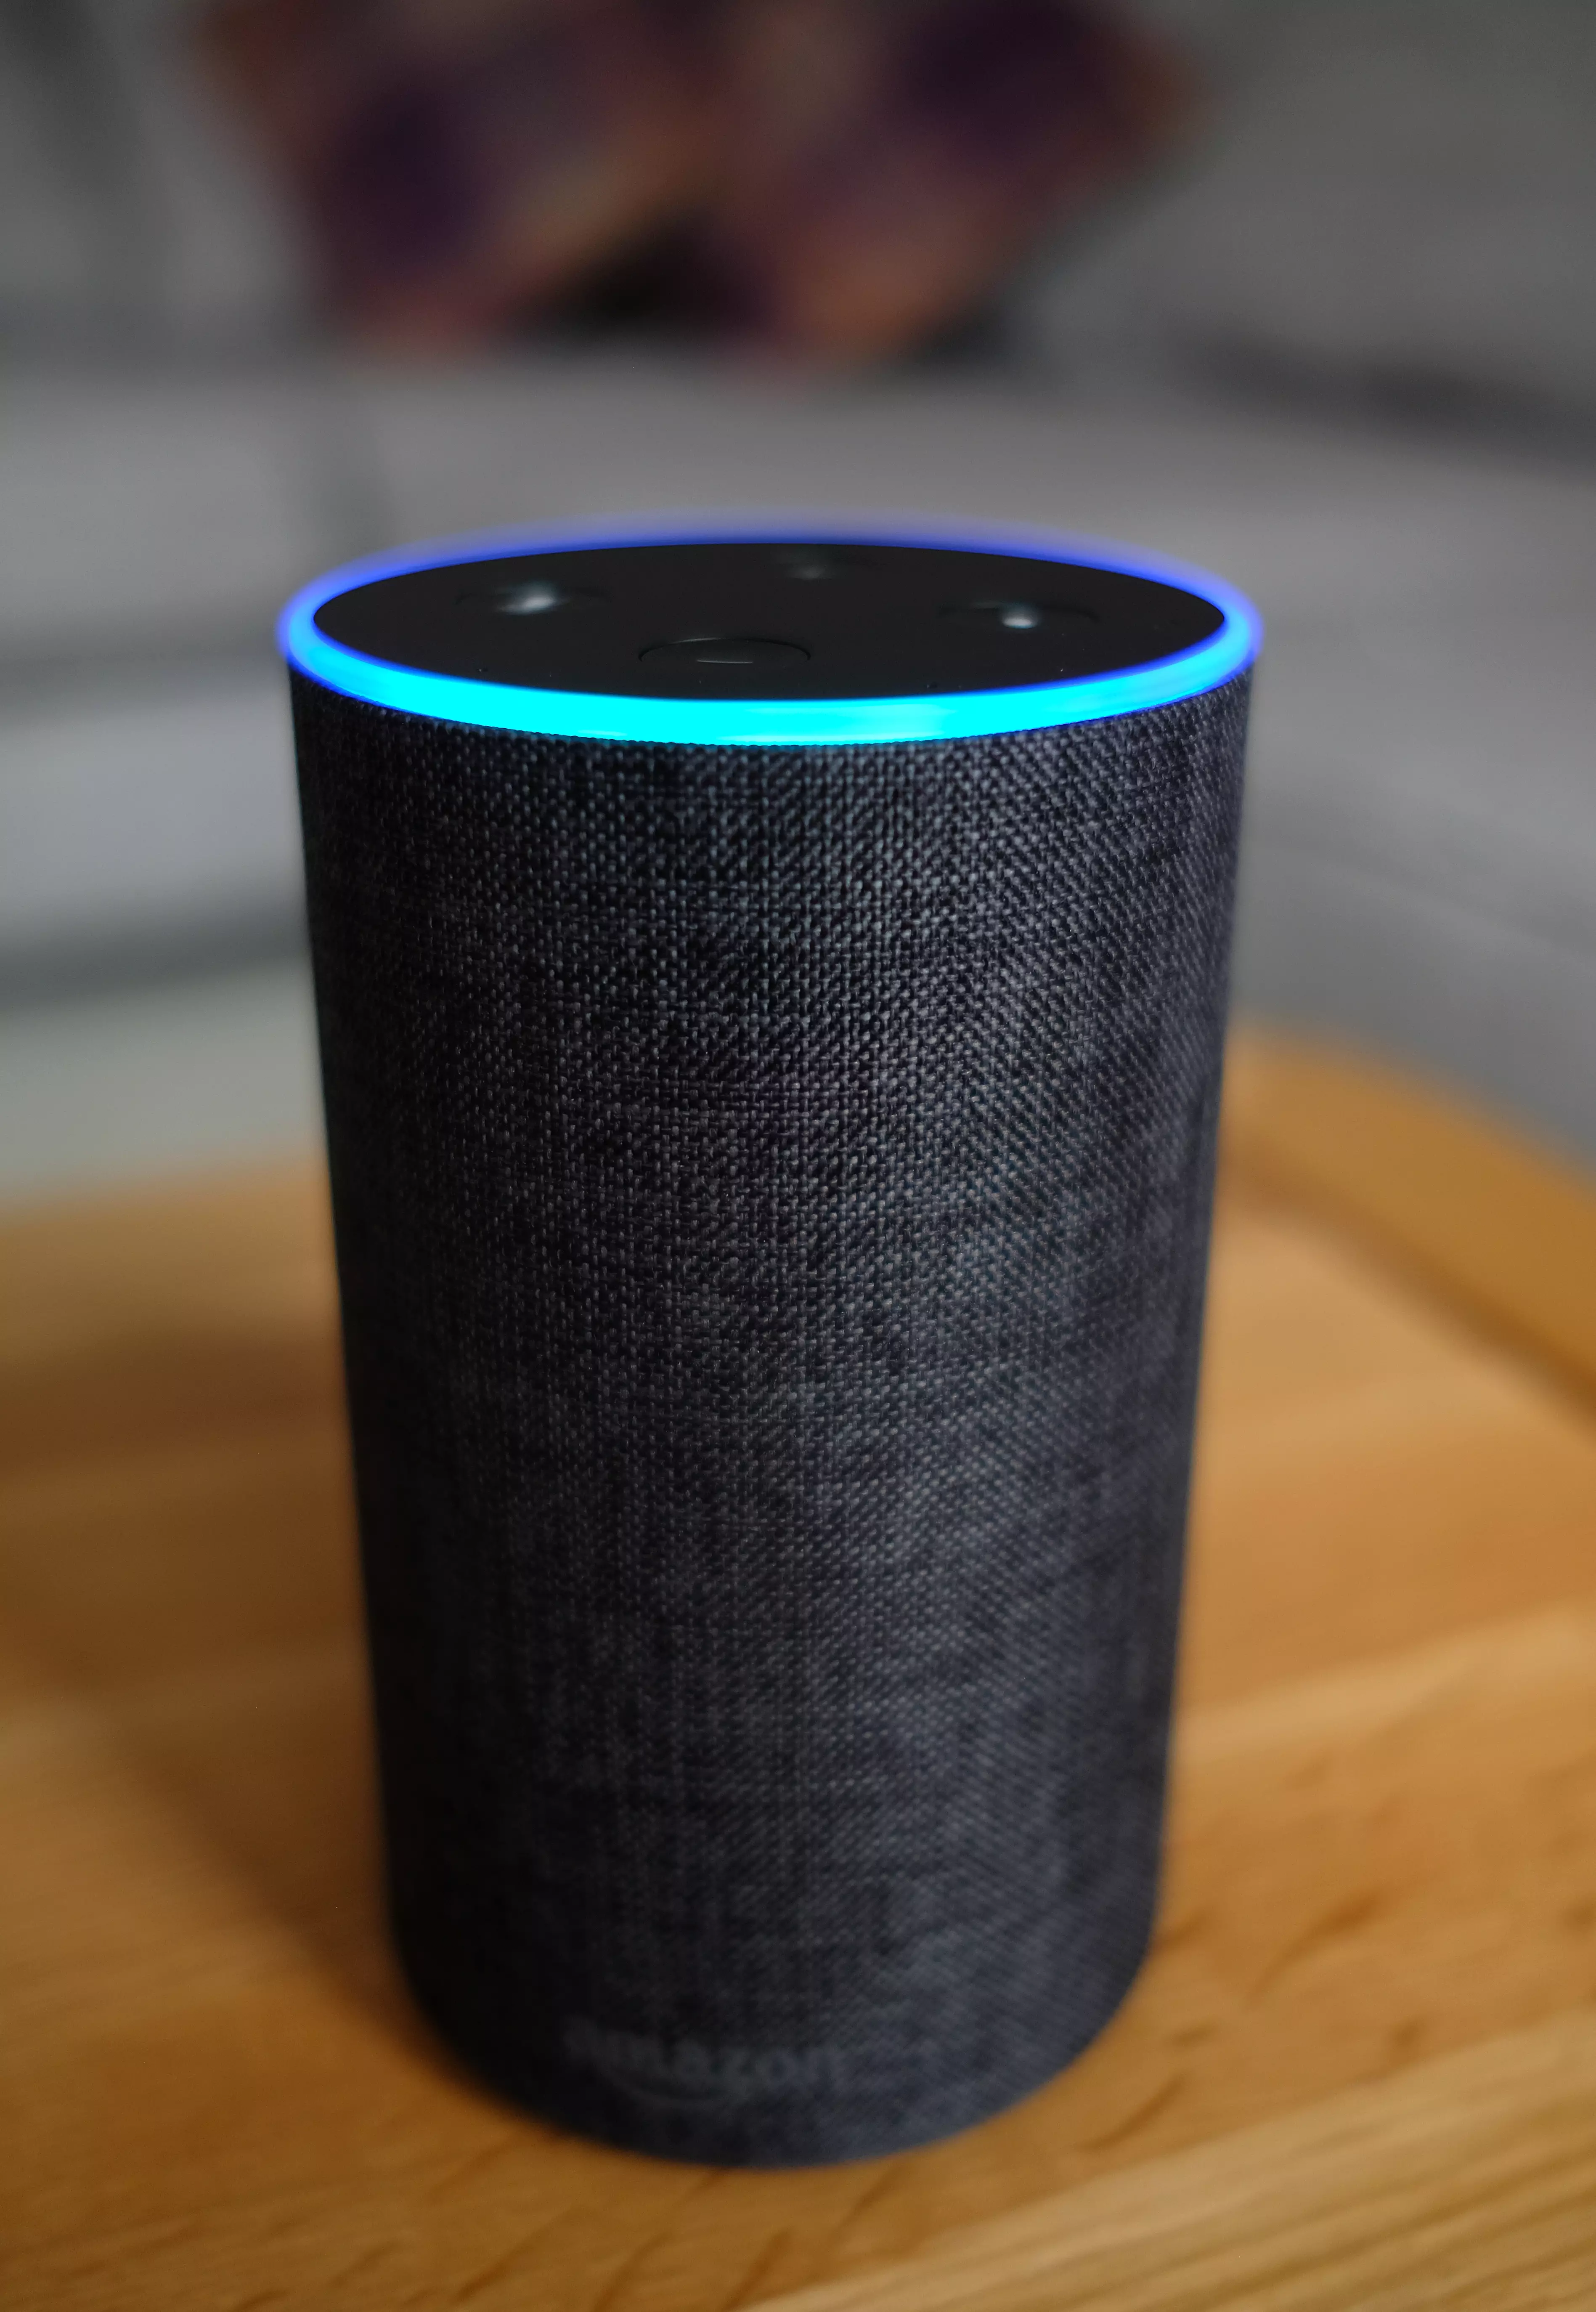 Super Alexa Mode is less super than you might have hoped.